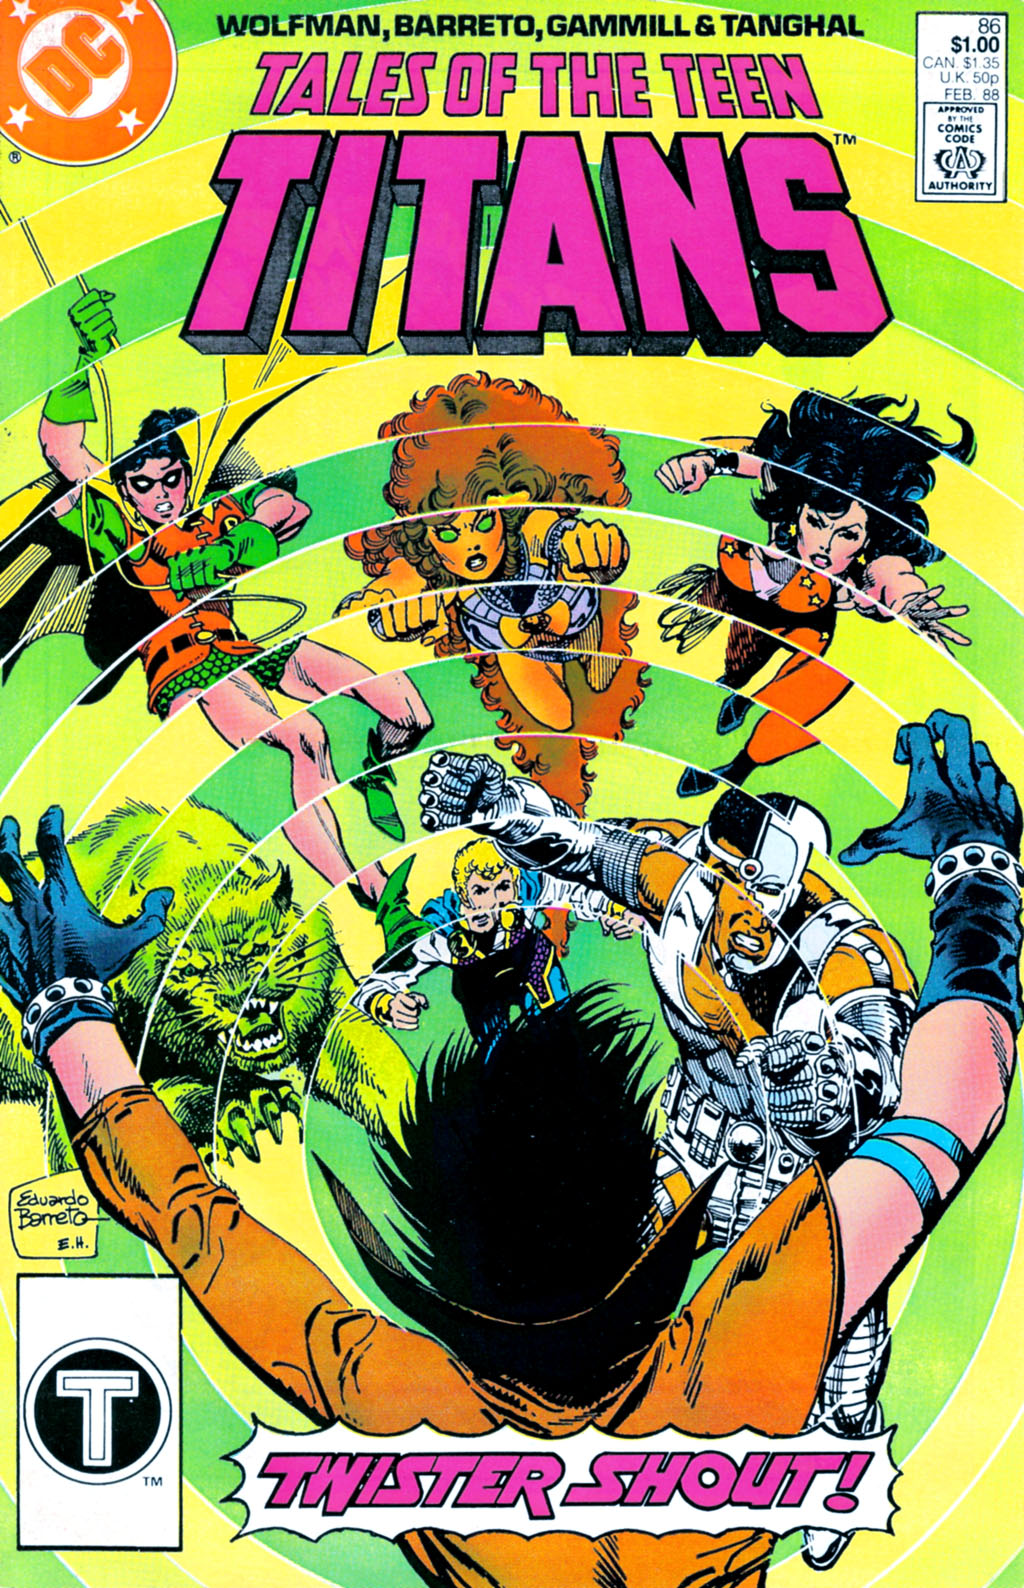 Read online Tales of the Teen Titans comic -  Issue #86 - 1